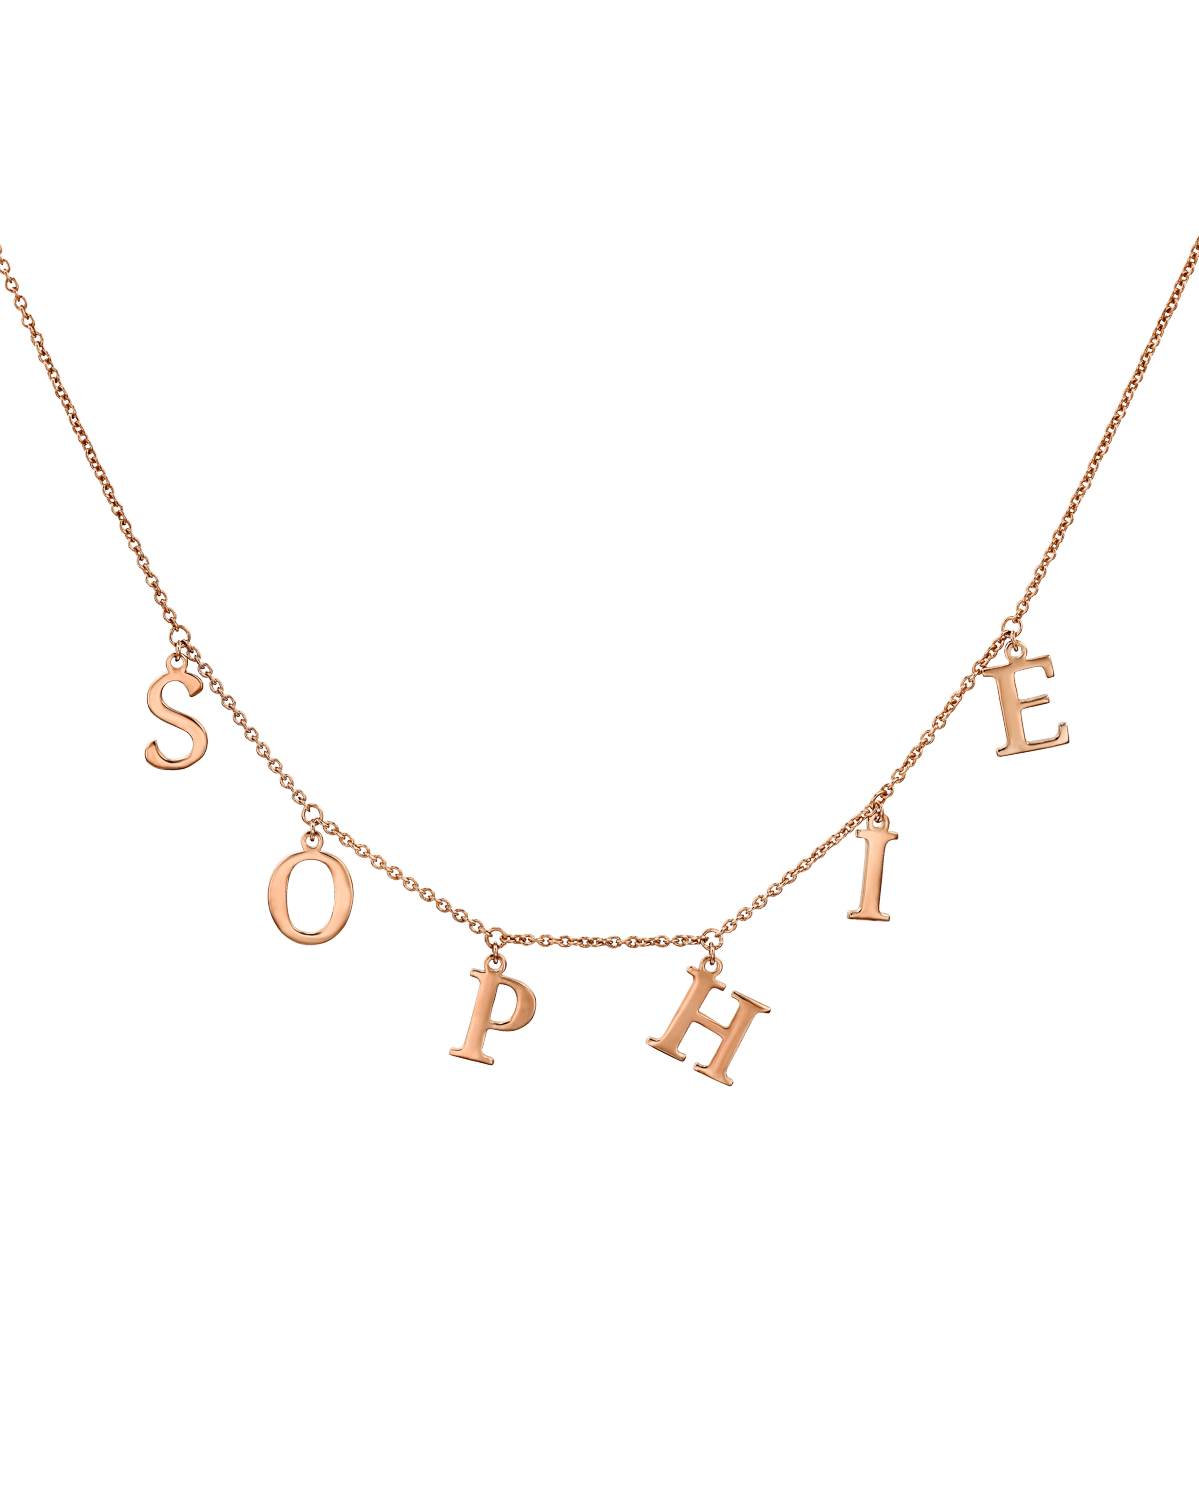 Name Chain Necklace-Serif – The Adorned